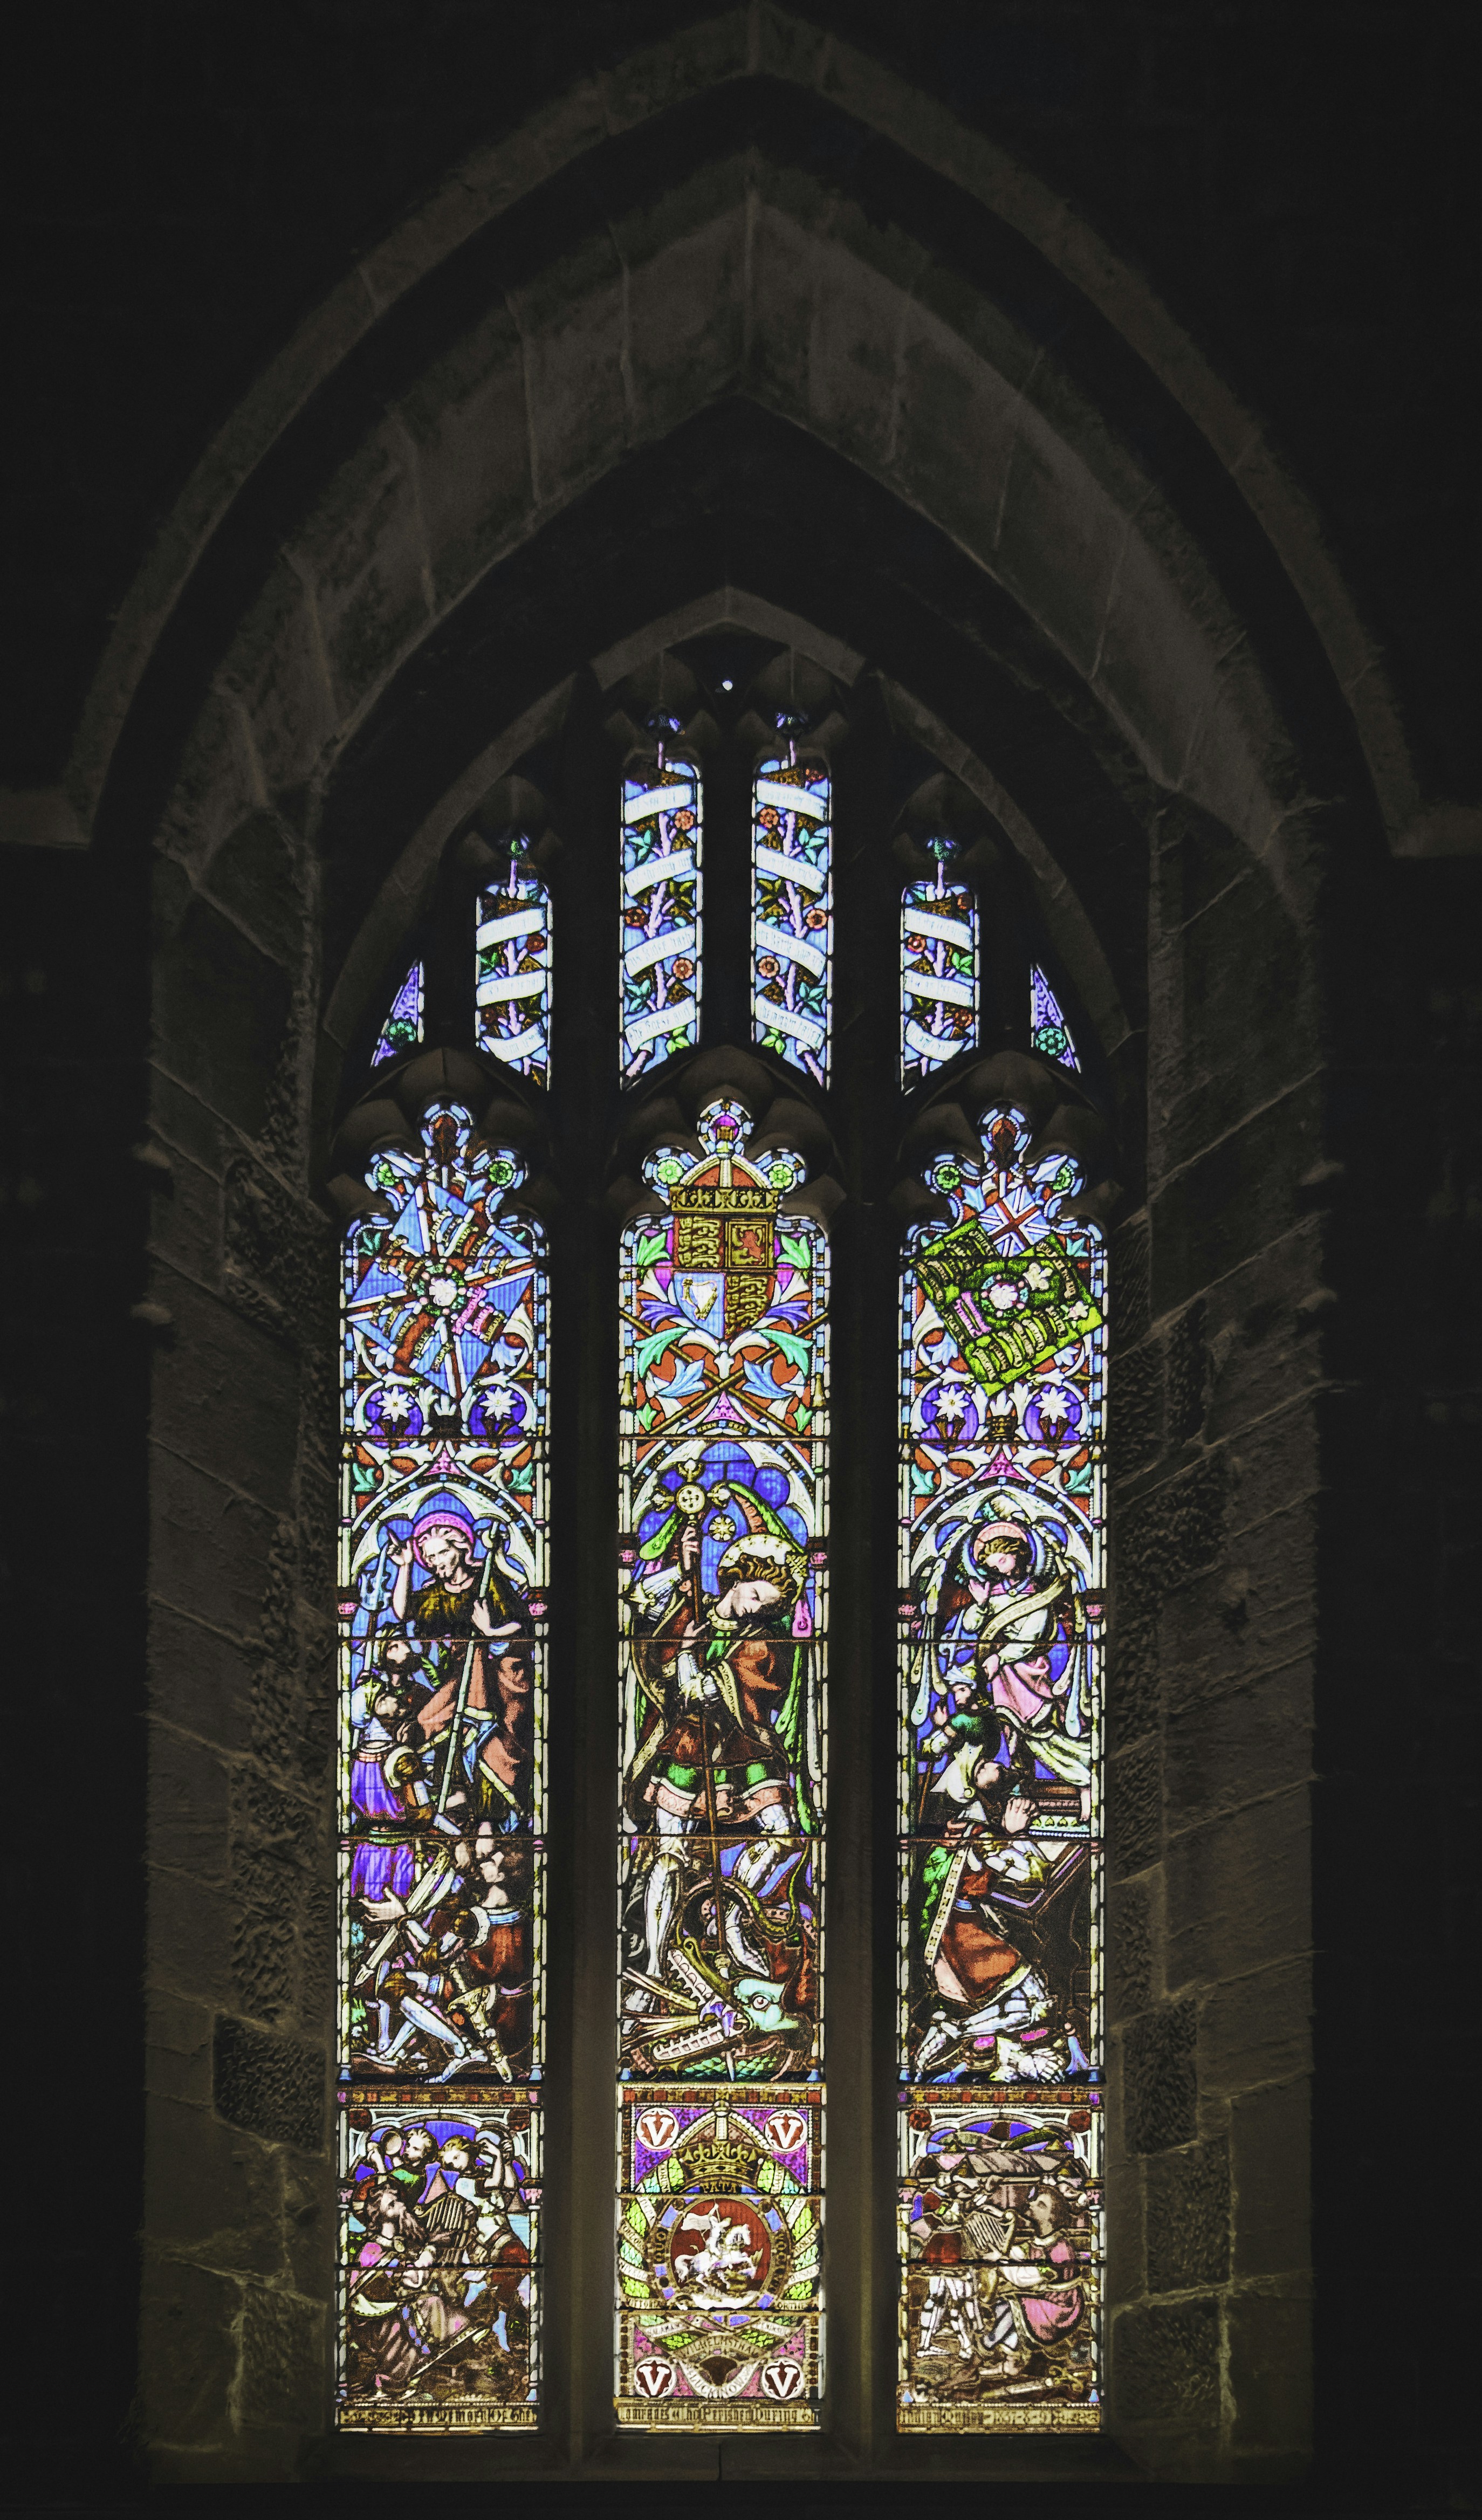 A stained-glass window depicting St. George slaying a dragon. Dragons play a dualistic role in mythology. They are both a threat and a protector--usually for valuable treasure in the case of the latter (Oct., 2021).